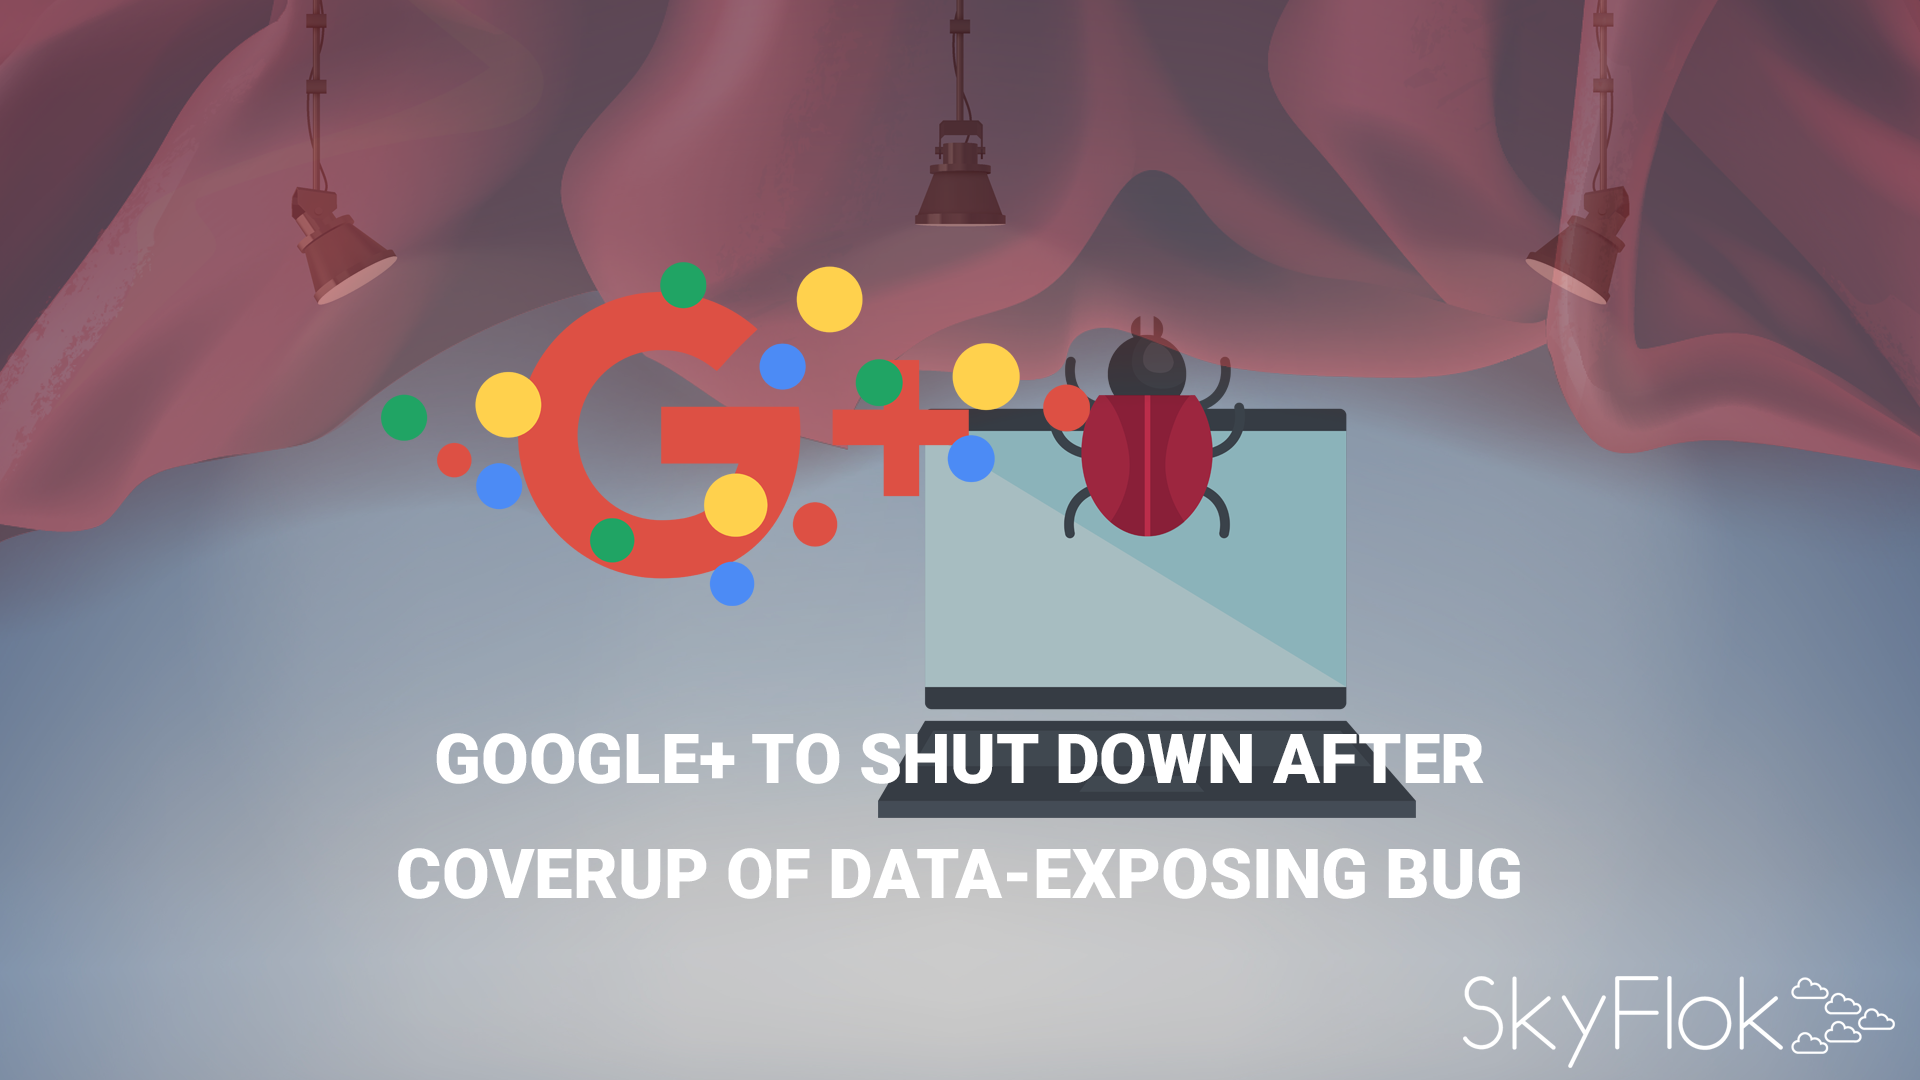 You are currently viewing Google+ to shut down after coverup of data-exposing bug